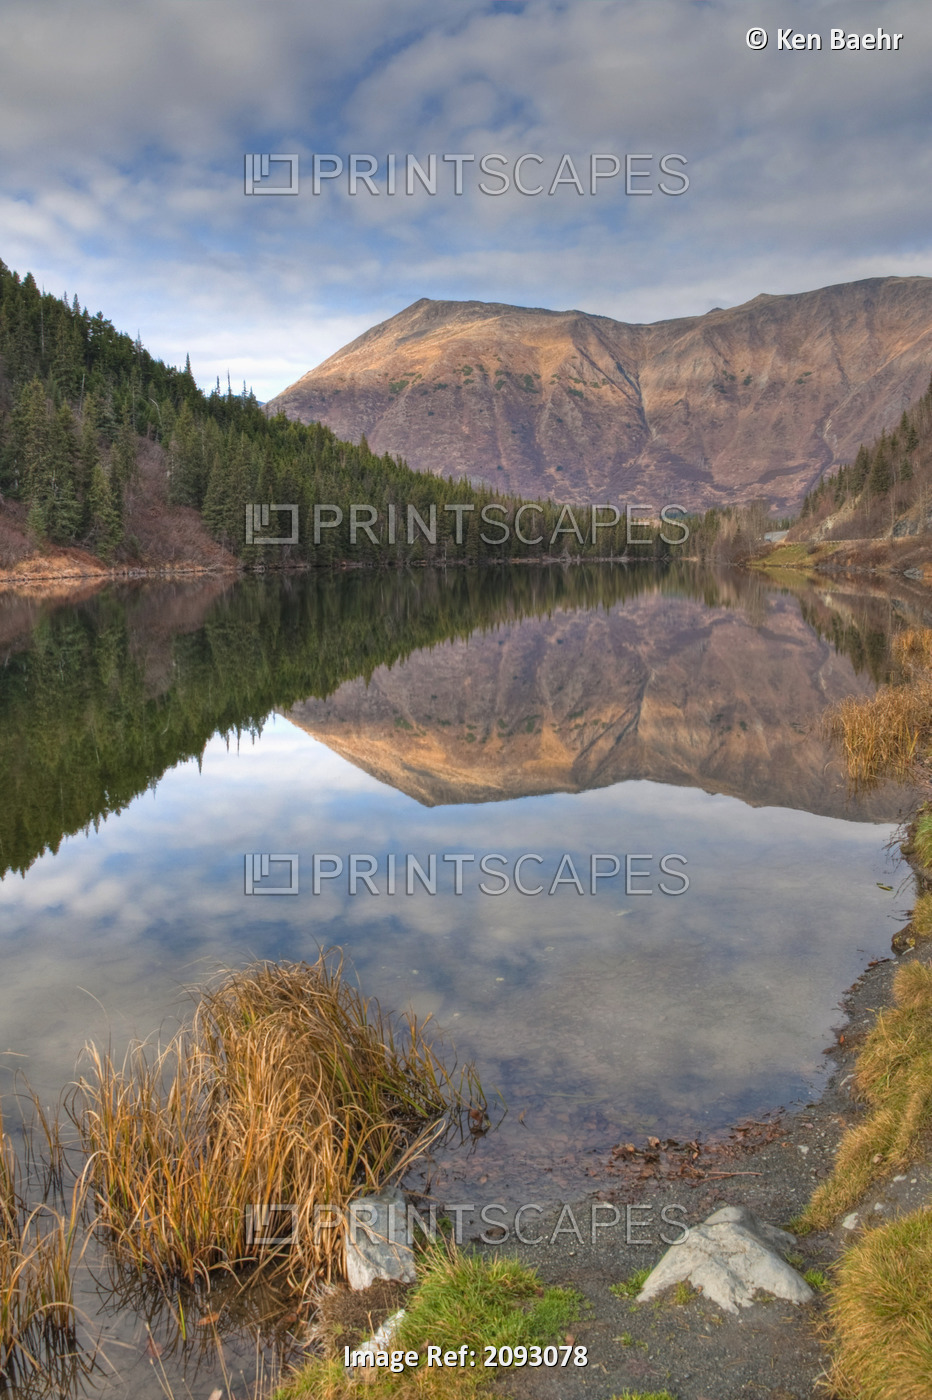 View Of Mountains Reflected In Jerome Lake Near The Juction Of Seward And ...